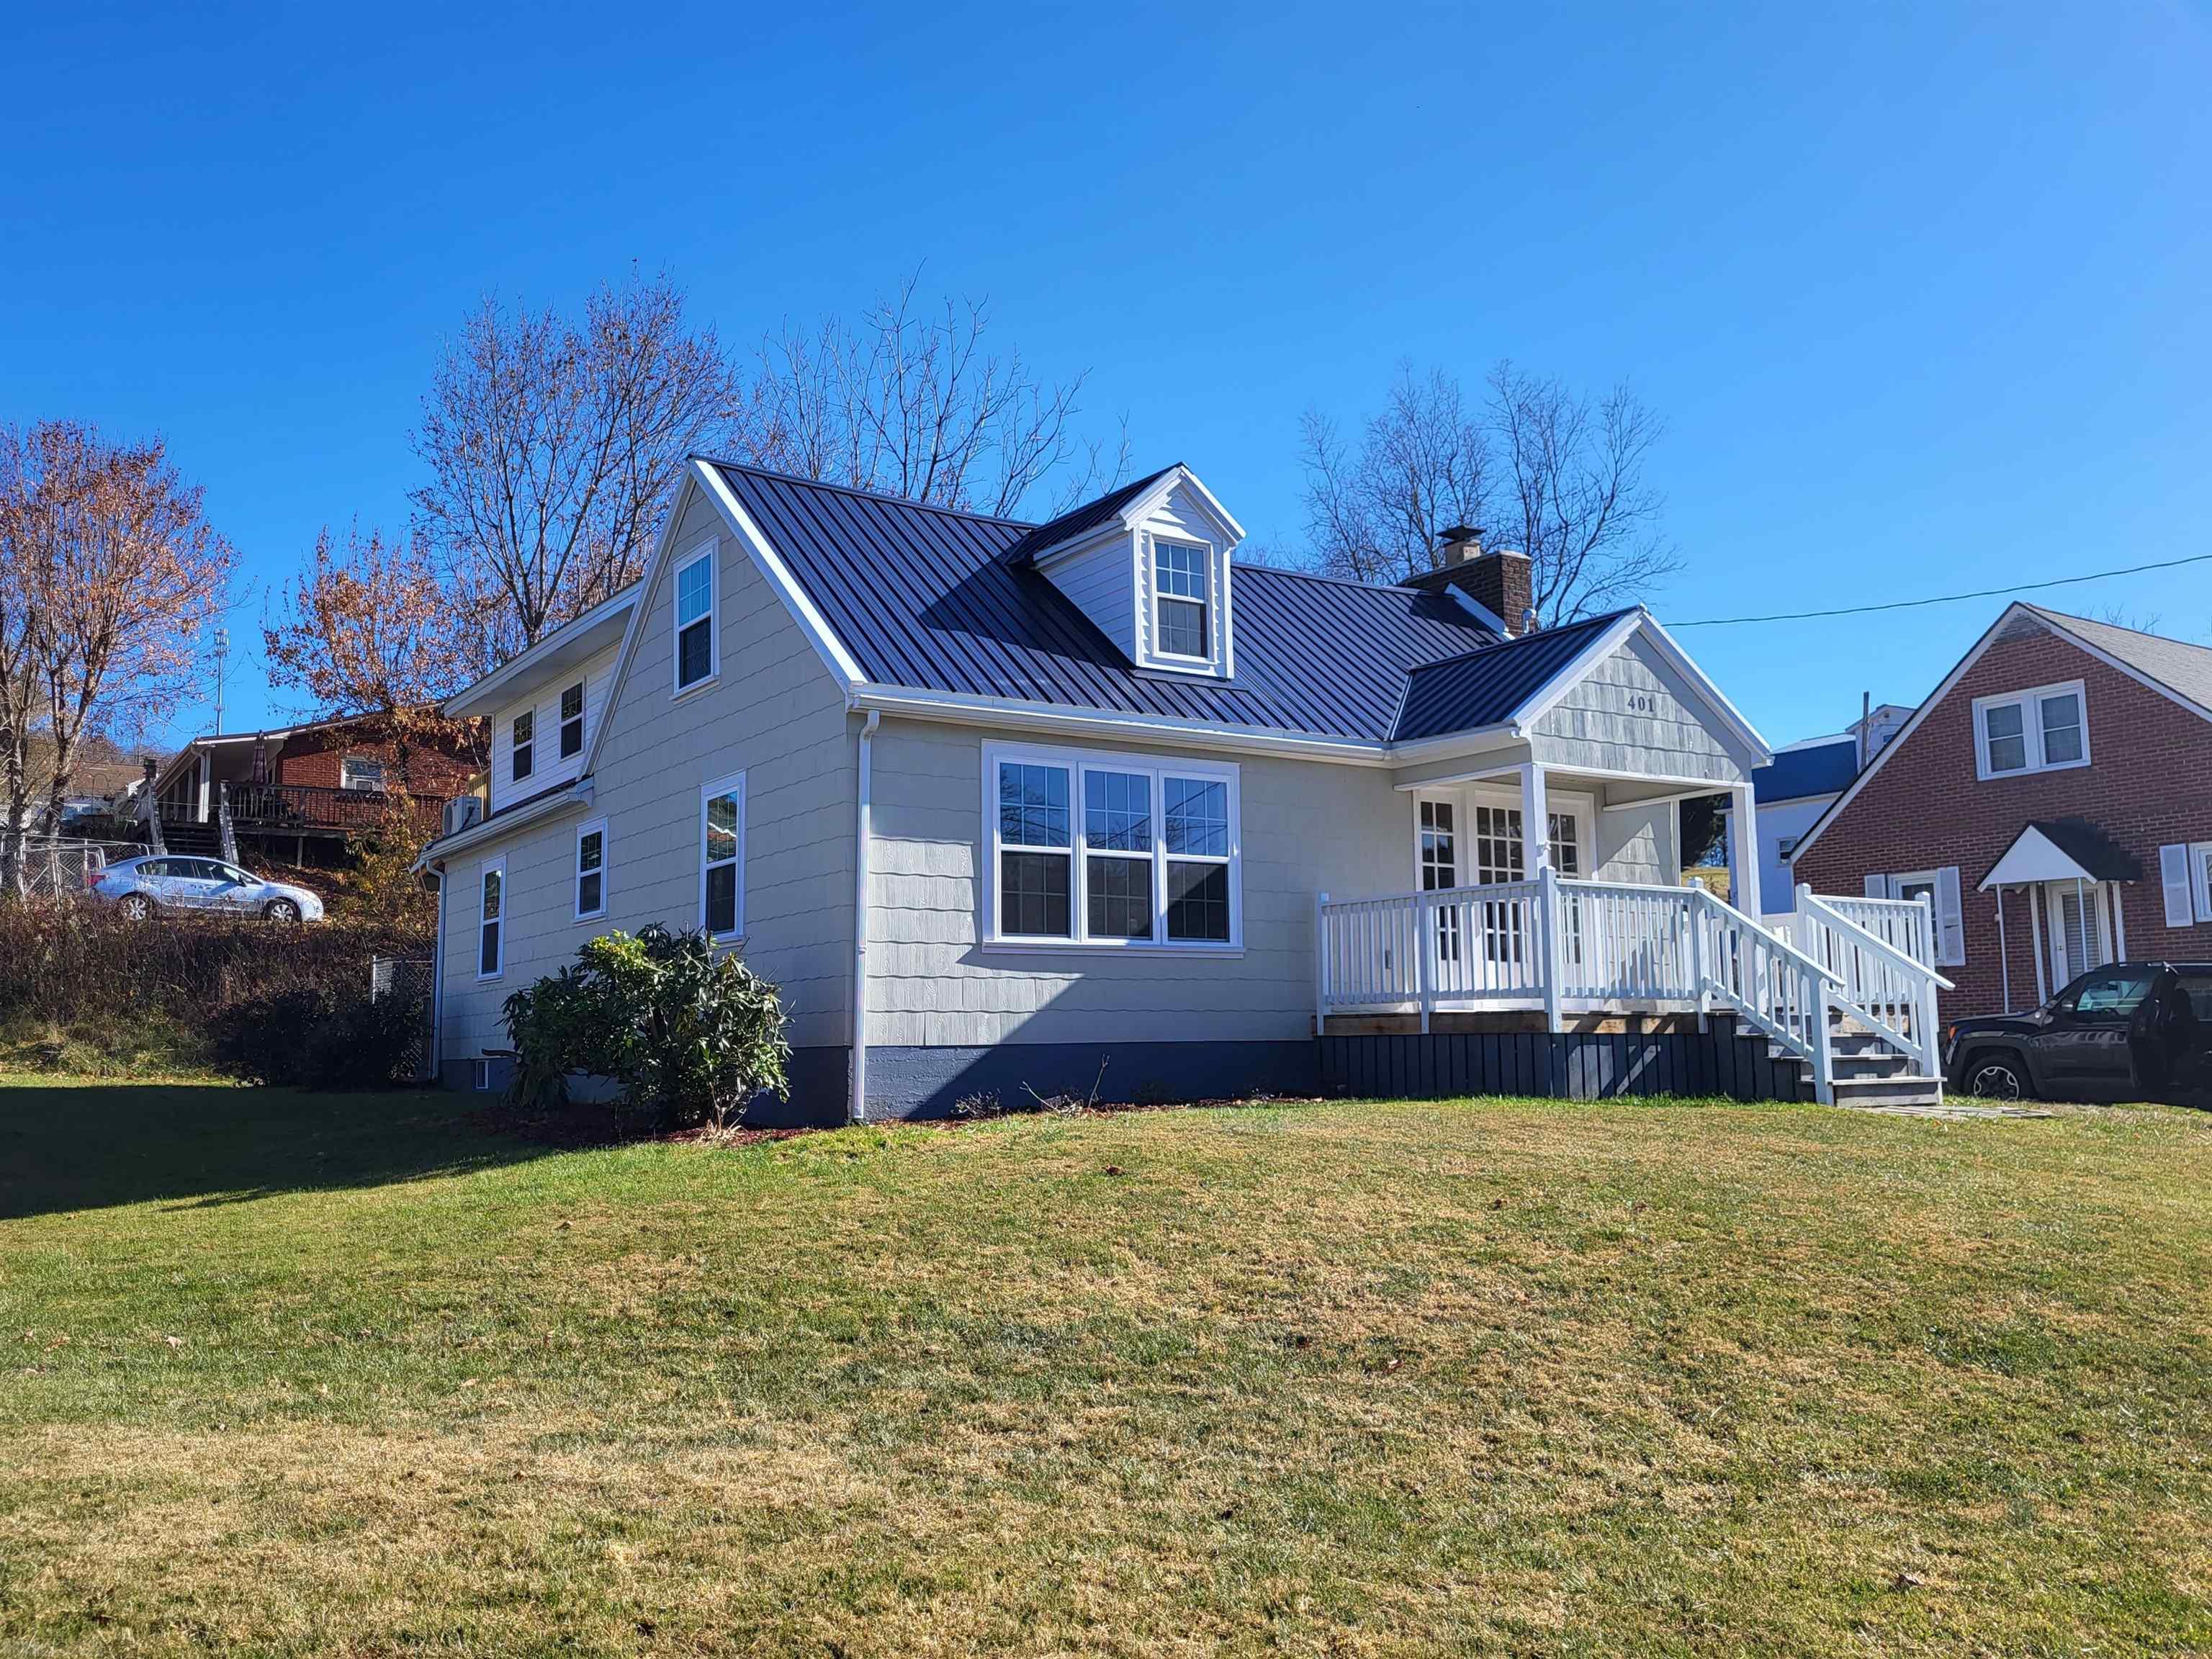 401 S Independence Avenue, Independence, VA 24348